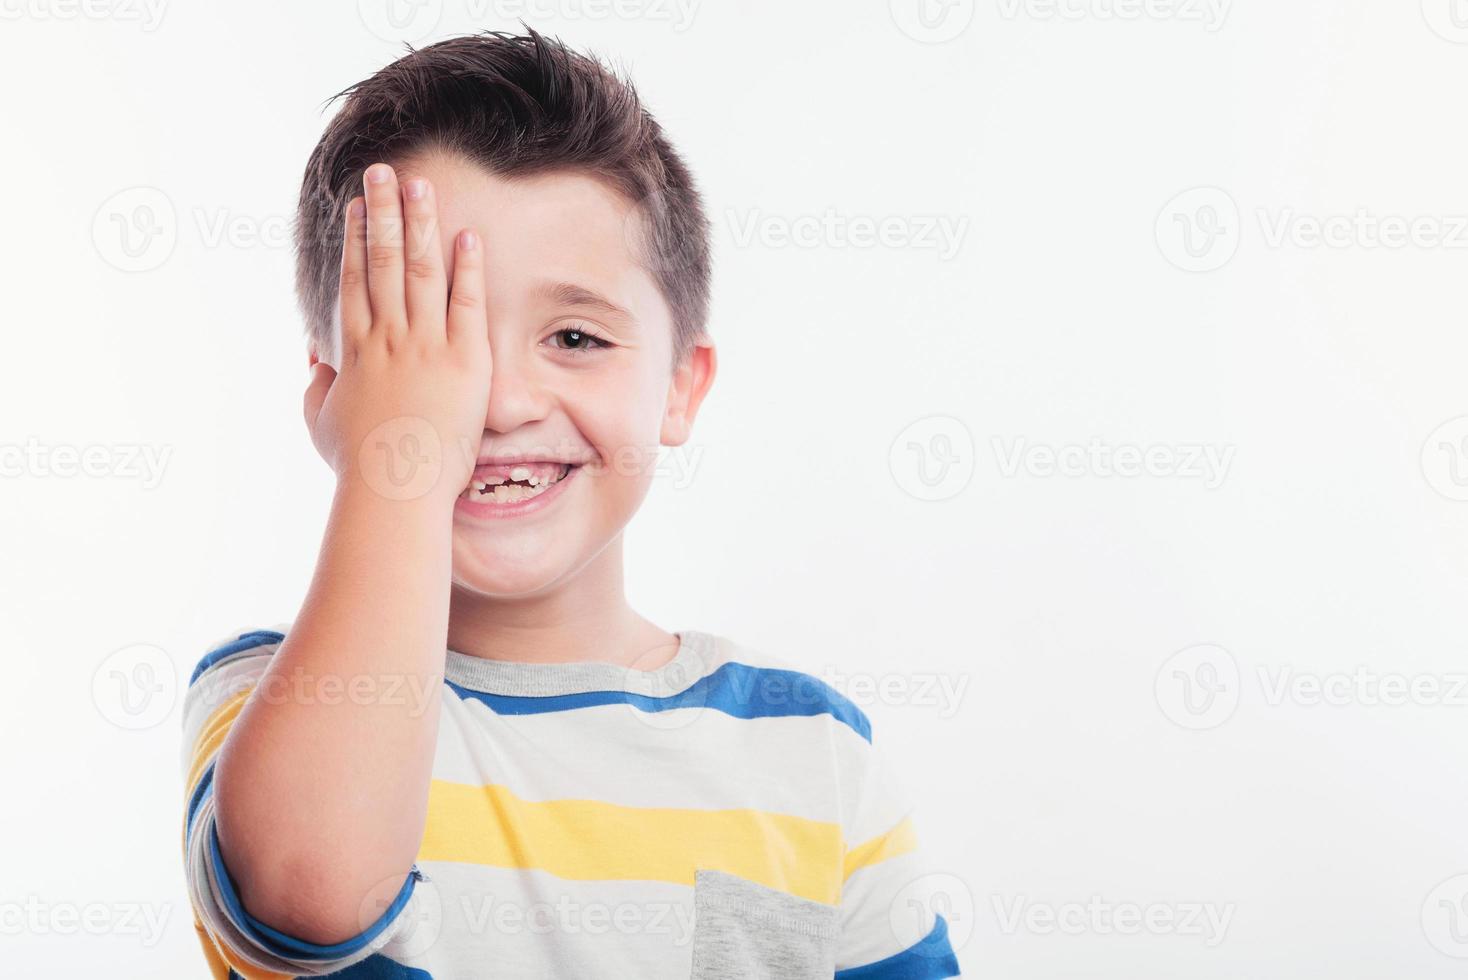 smiling child covering his eye photo